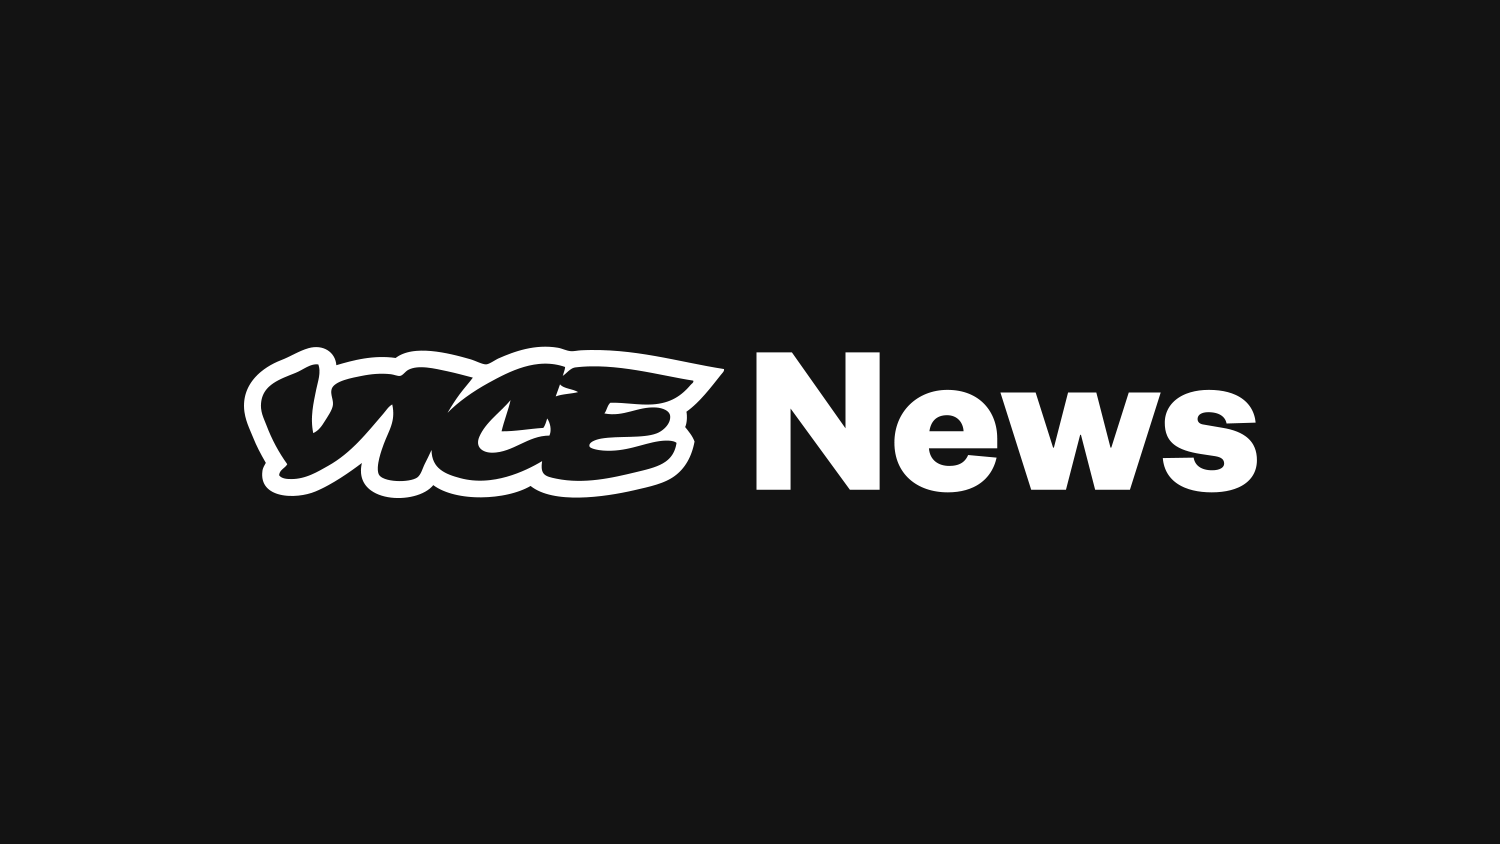 Preview-VICE-News-Blk logo.png